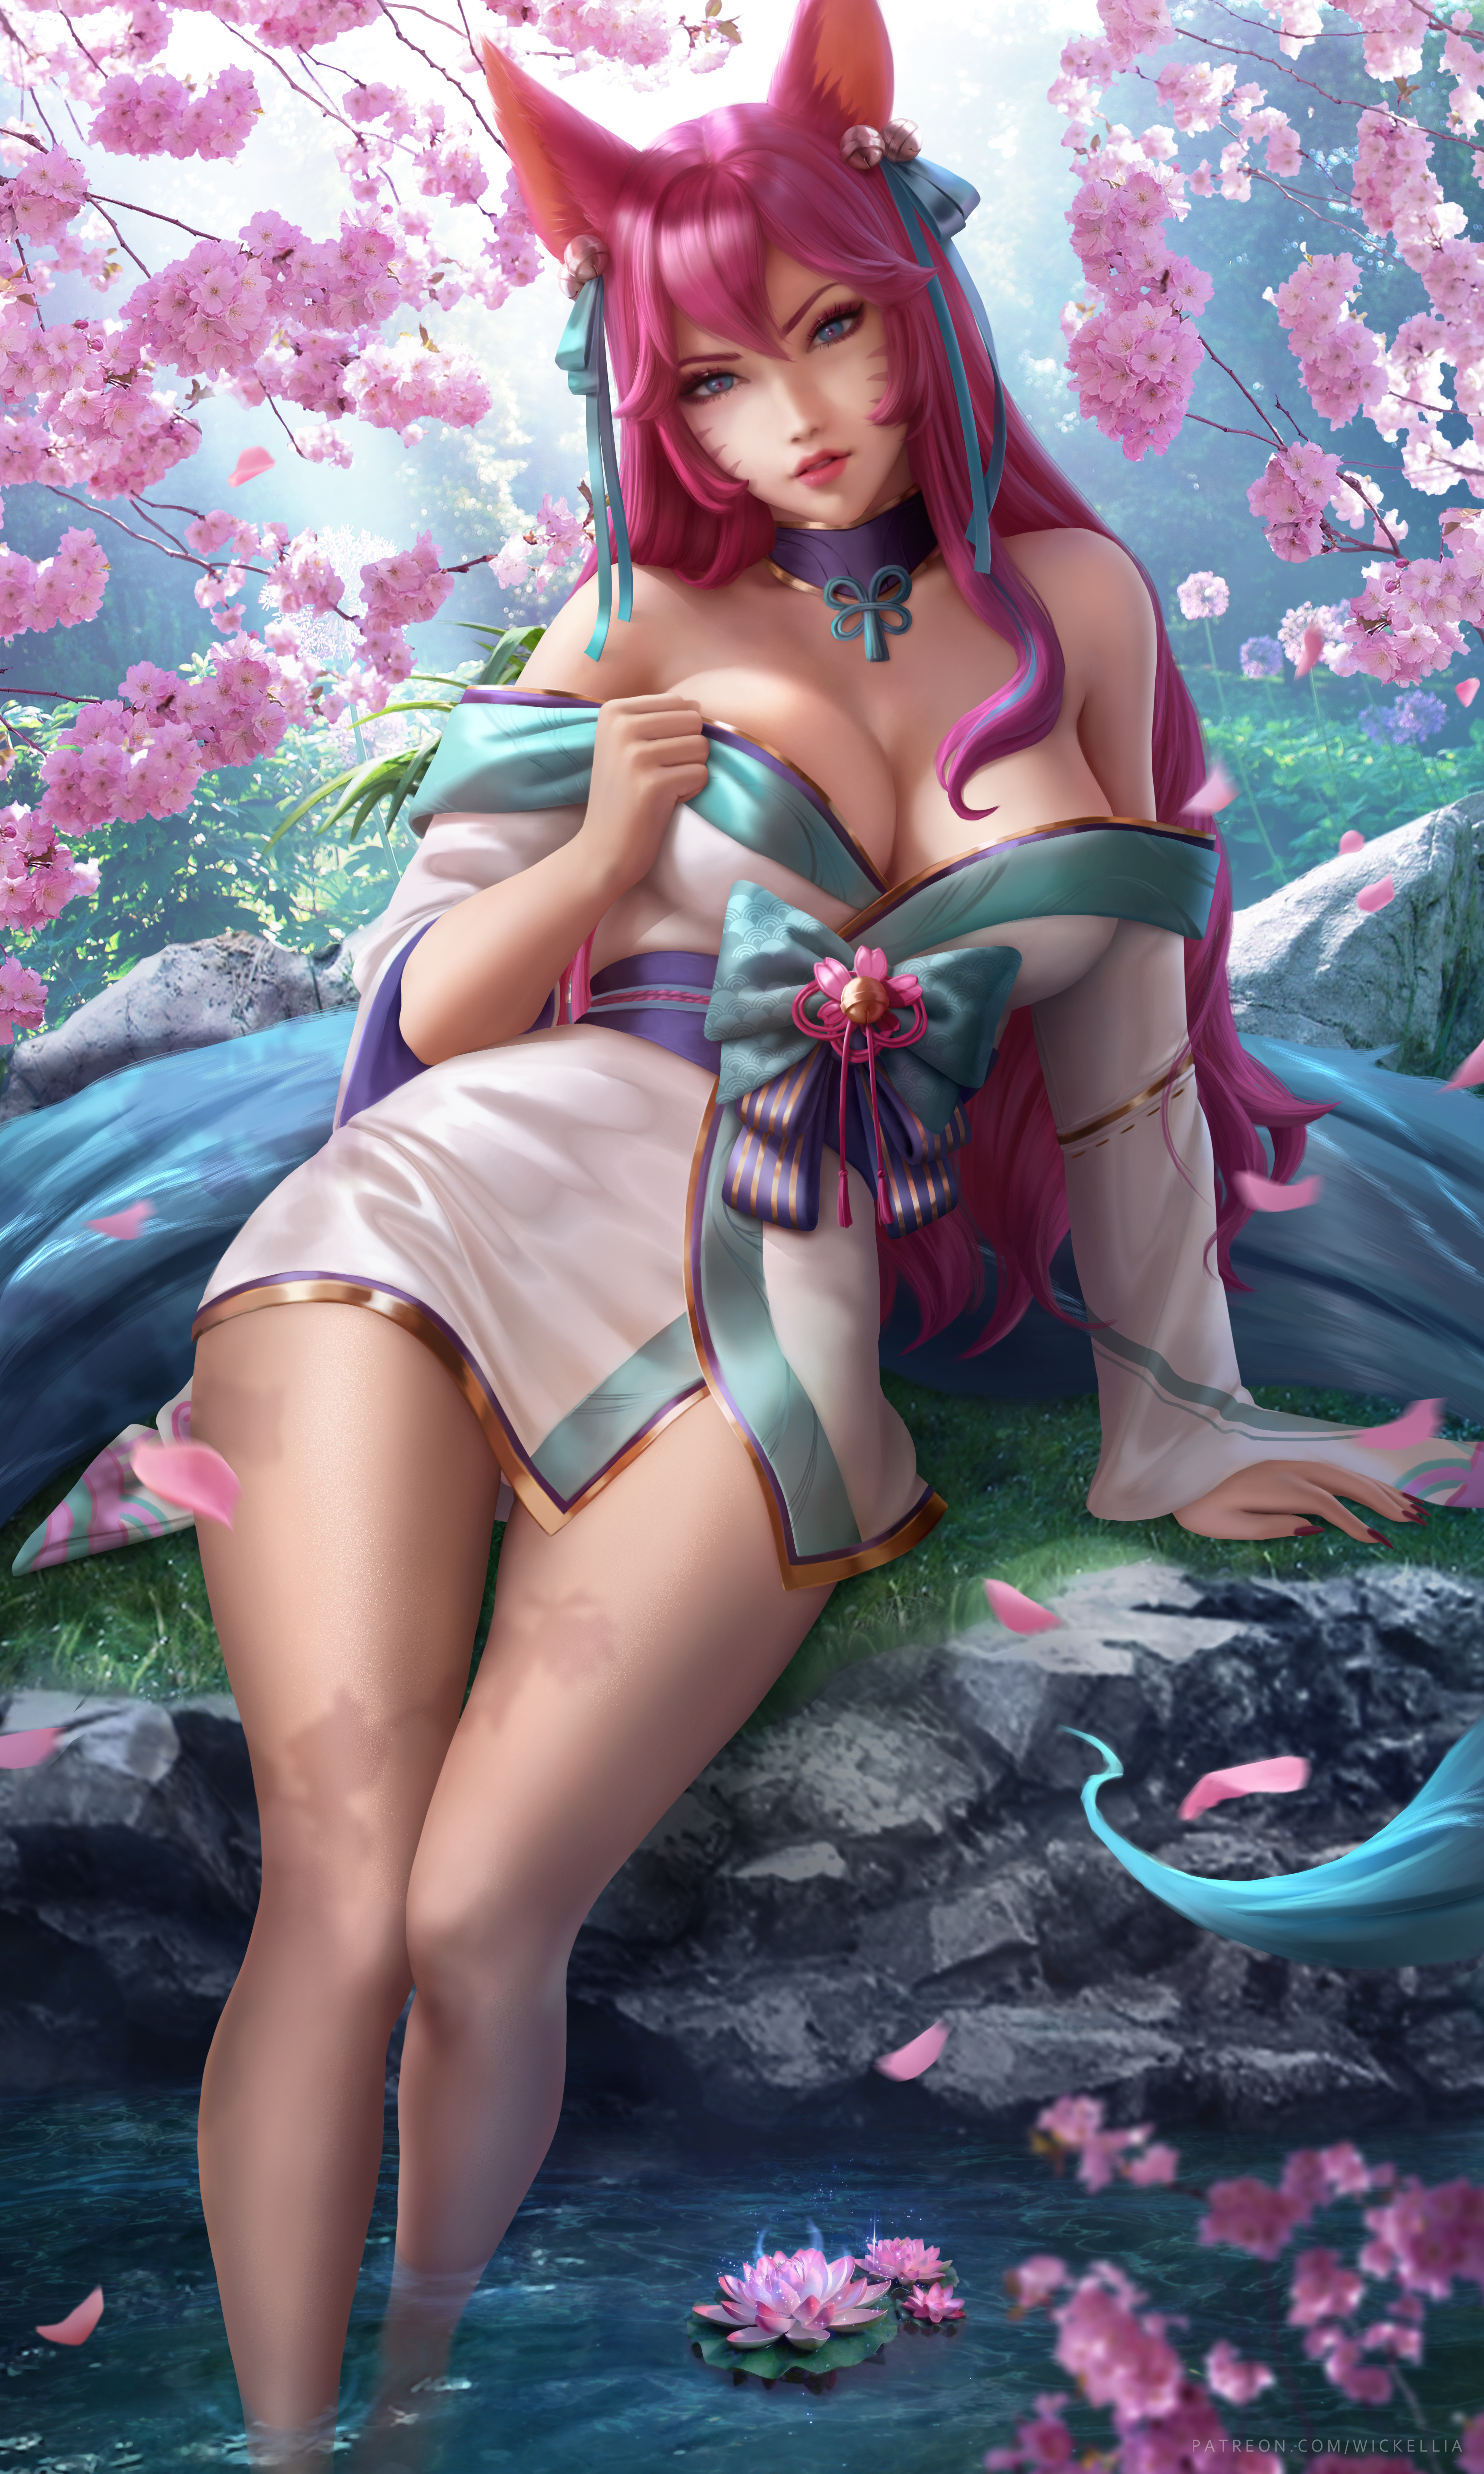 General 3899x6500 illustration artwork digital art fan art drawing Wickellia video games video game girls video game characters League of Legends Ahri (League of Legends) spirit blossom women looking at viewer legs pink hair water cleavage fantasy girl long hair